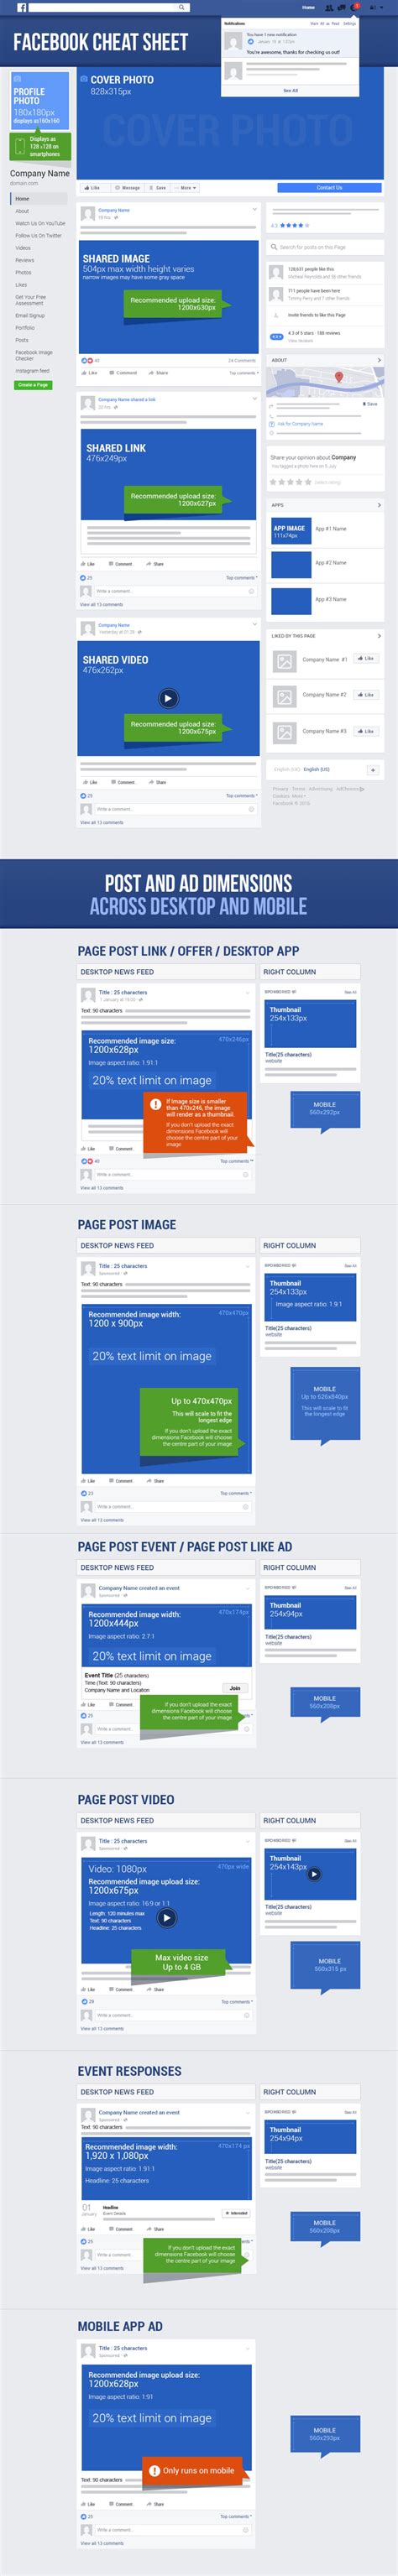 The Ultimate Cheat Sheet For Facebook Image Sizes Infographic